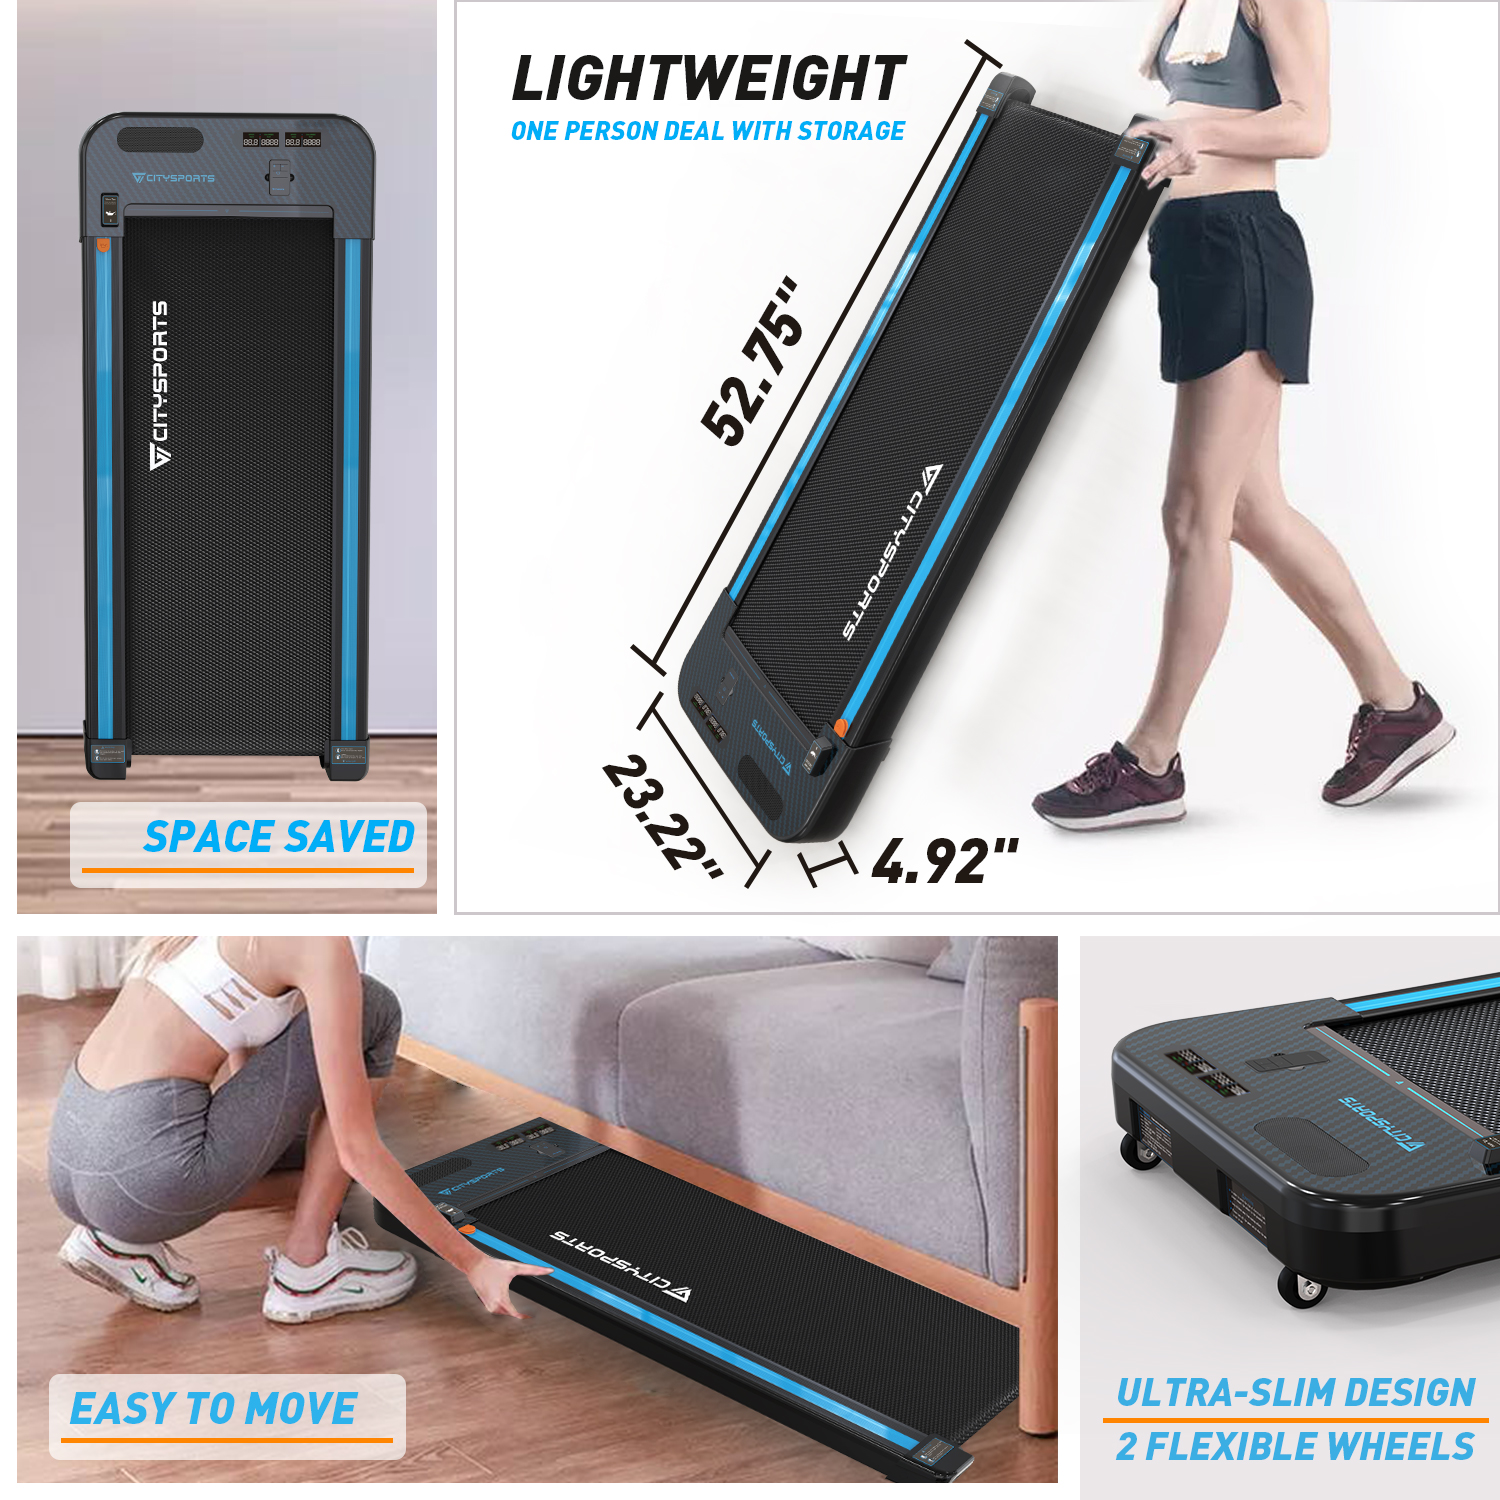 Gearstone Treadmills for Home, CITYSPORTS Walking Pad Treadmill with Audio Speakers, Slim & Portable - image 4 of 7